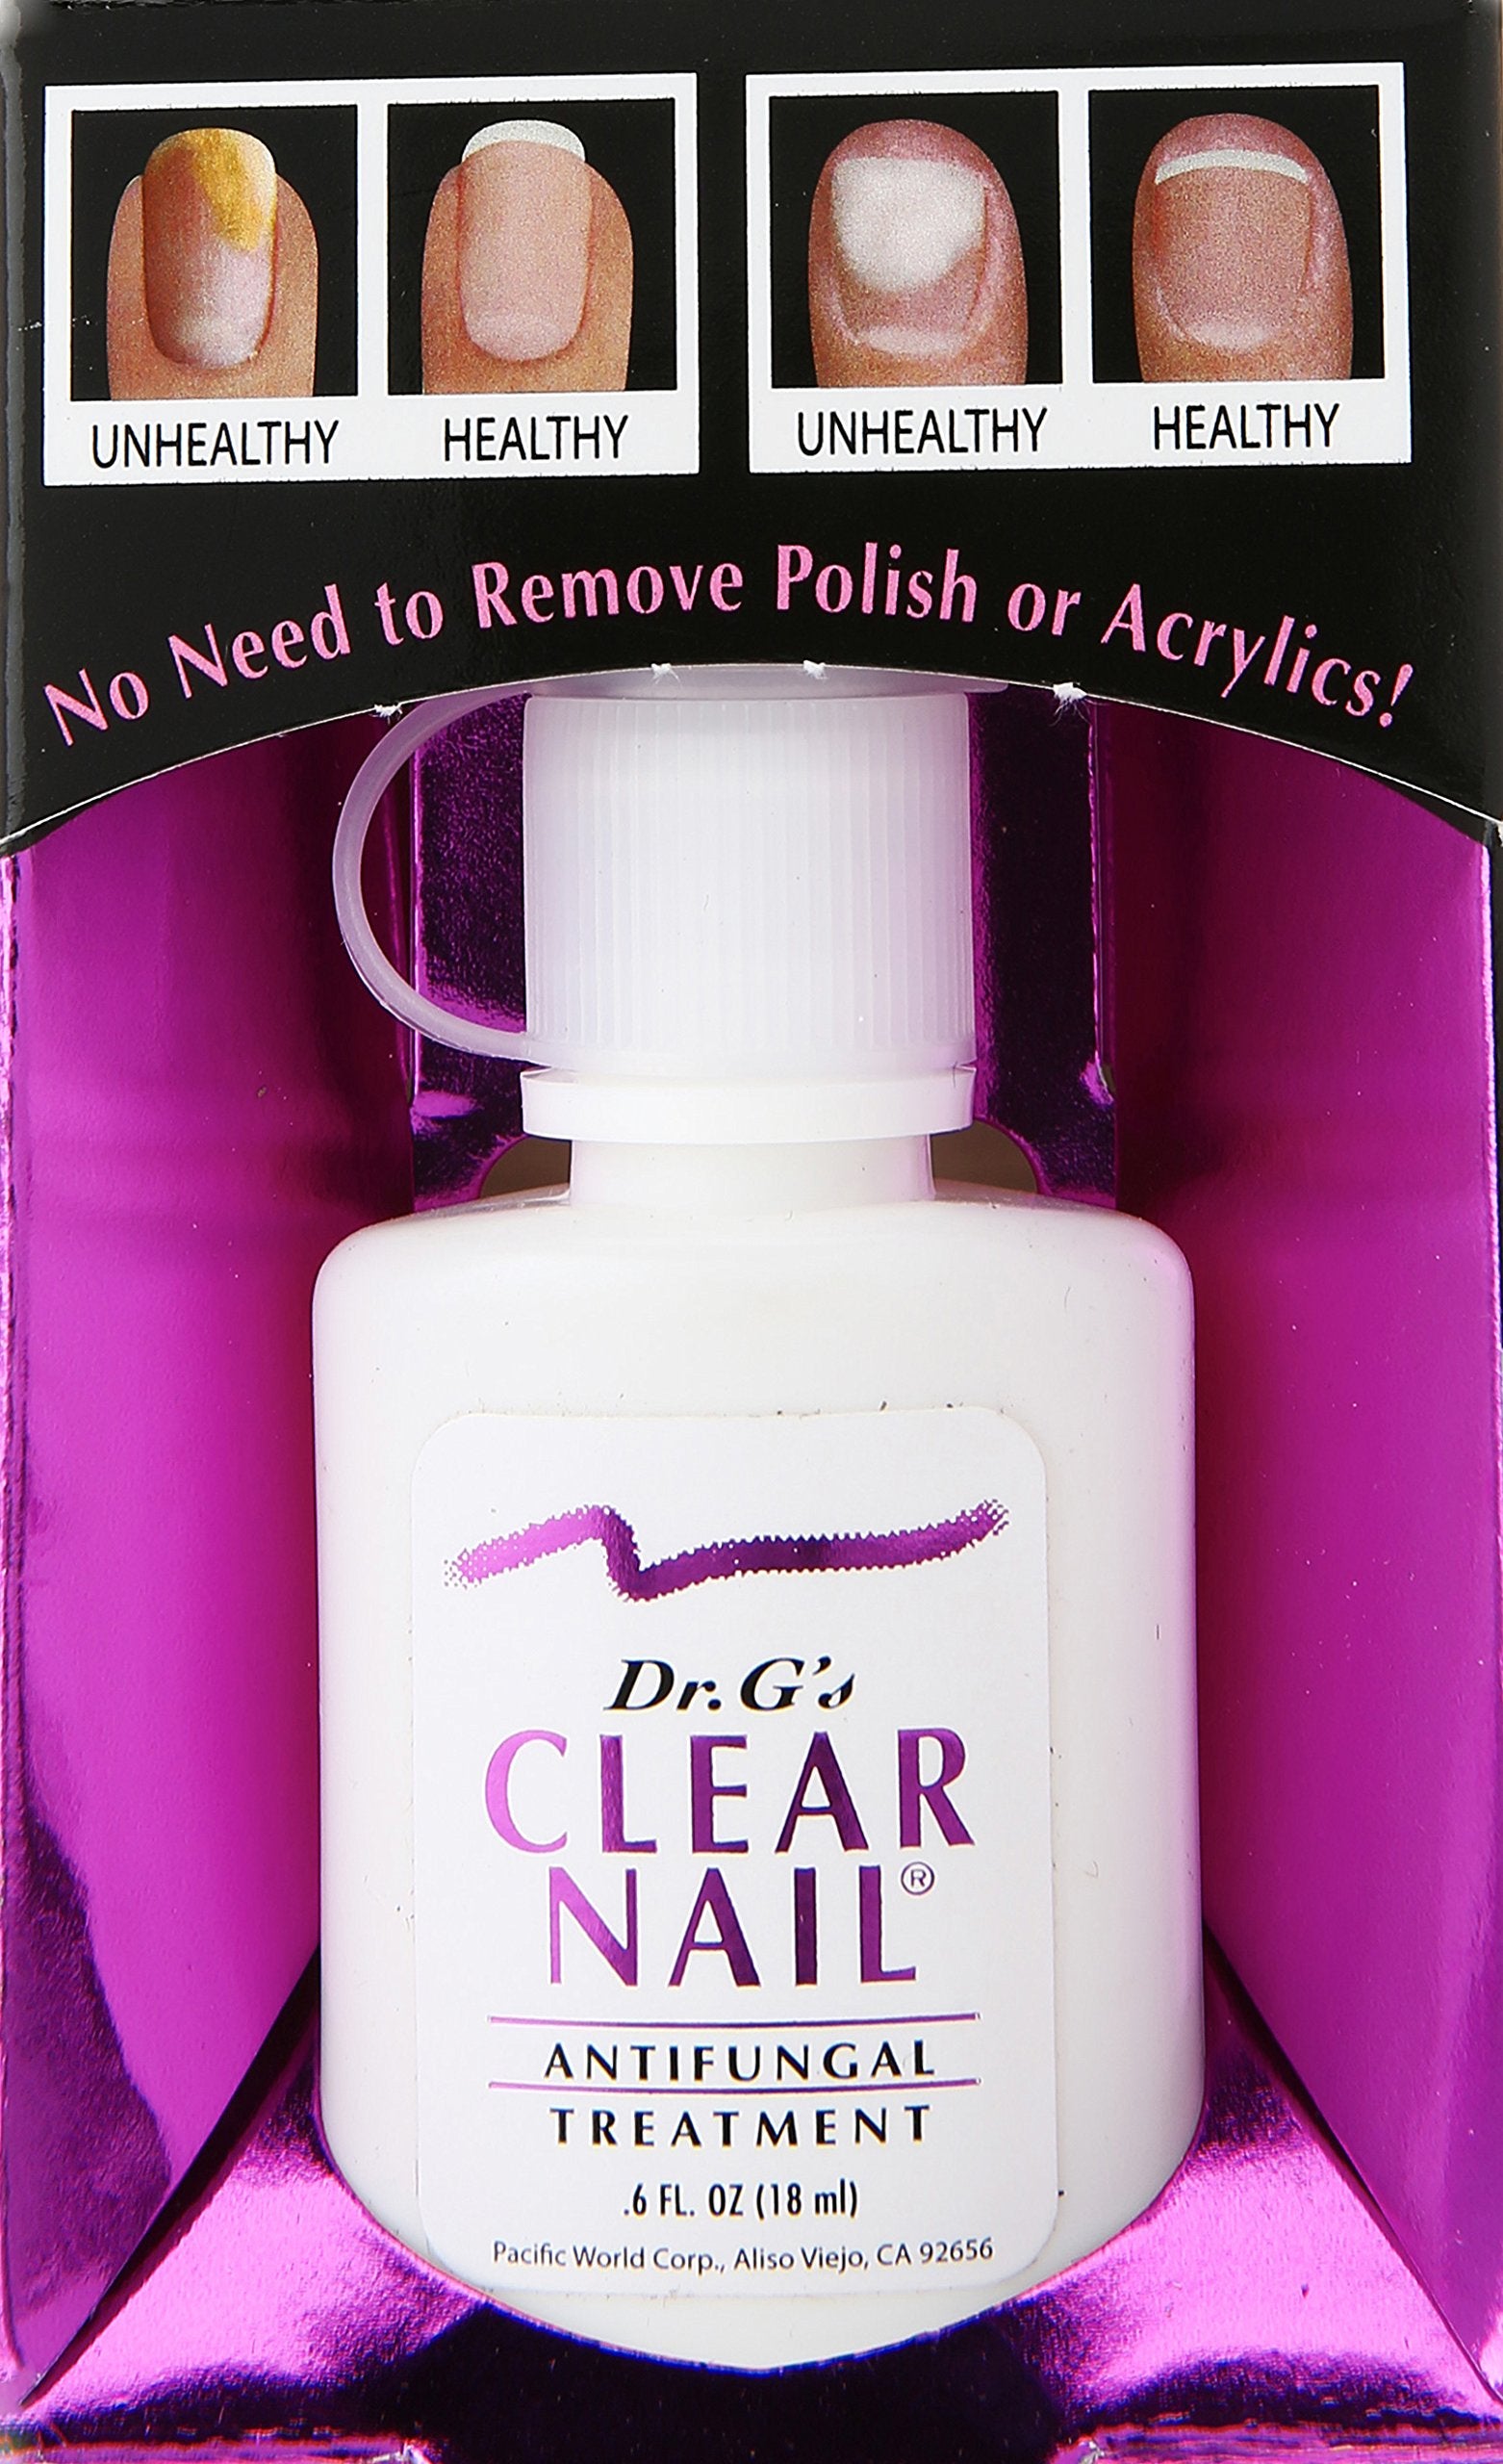 Nail Disinfectant / Toes Disinfectant